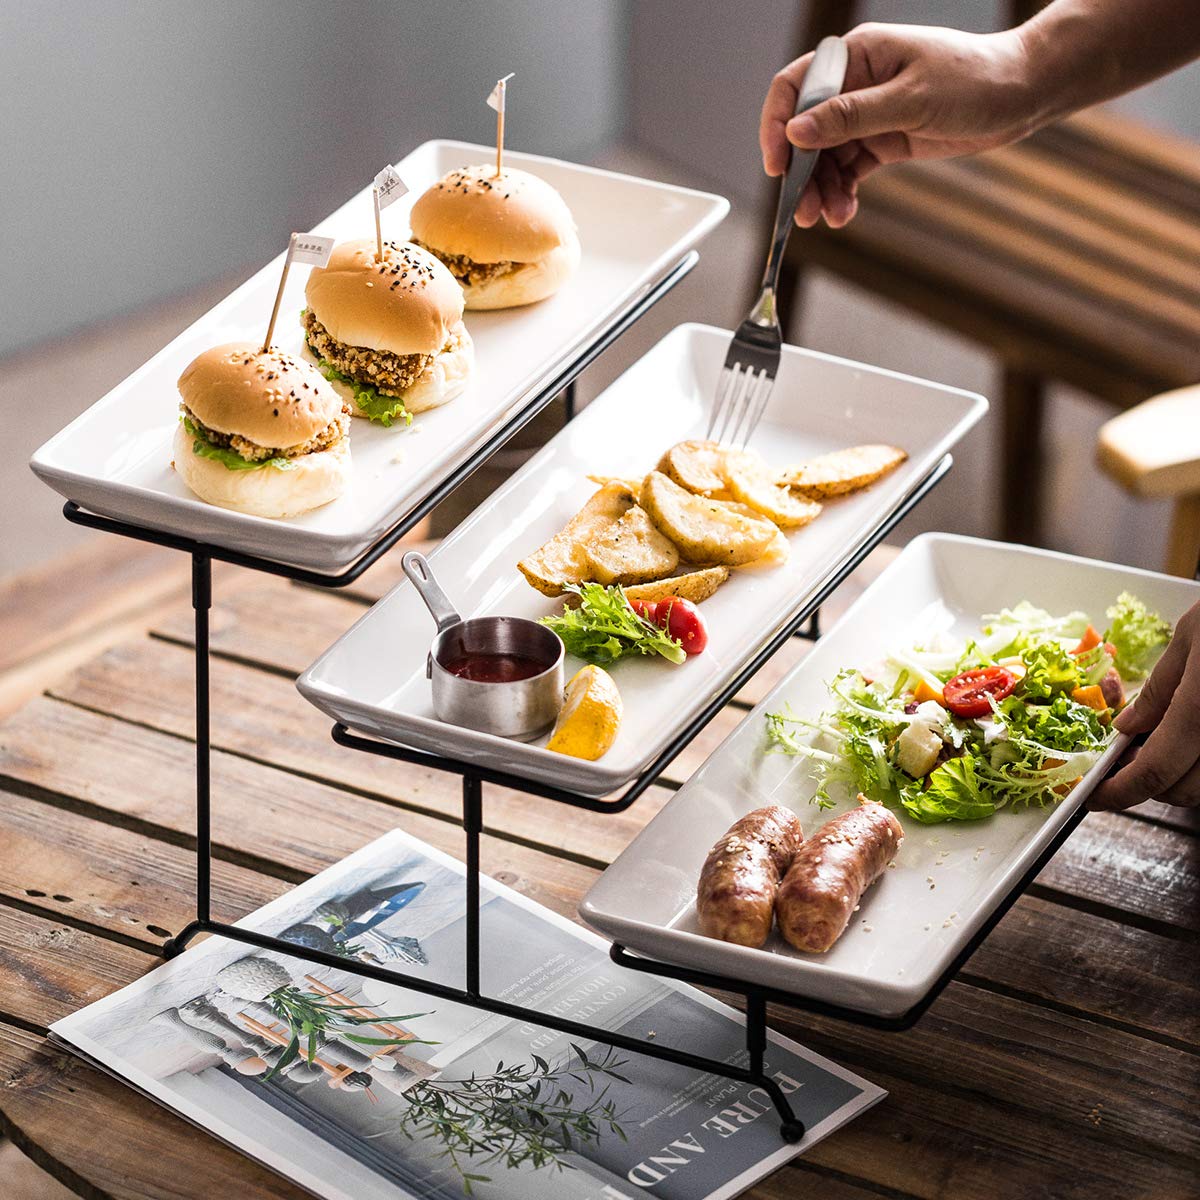 YHOSSEUN 3 Tier Serving Stand Tiered Serving Stand + Tierd Serving Bowl Set Porcelain Chip and Dip Serving Set